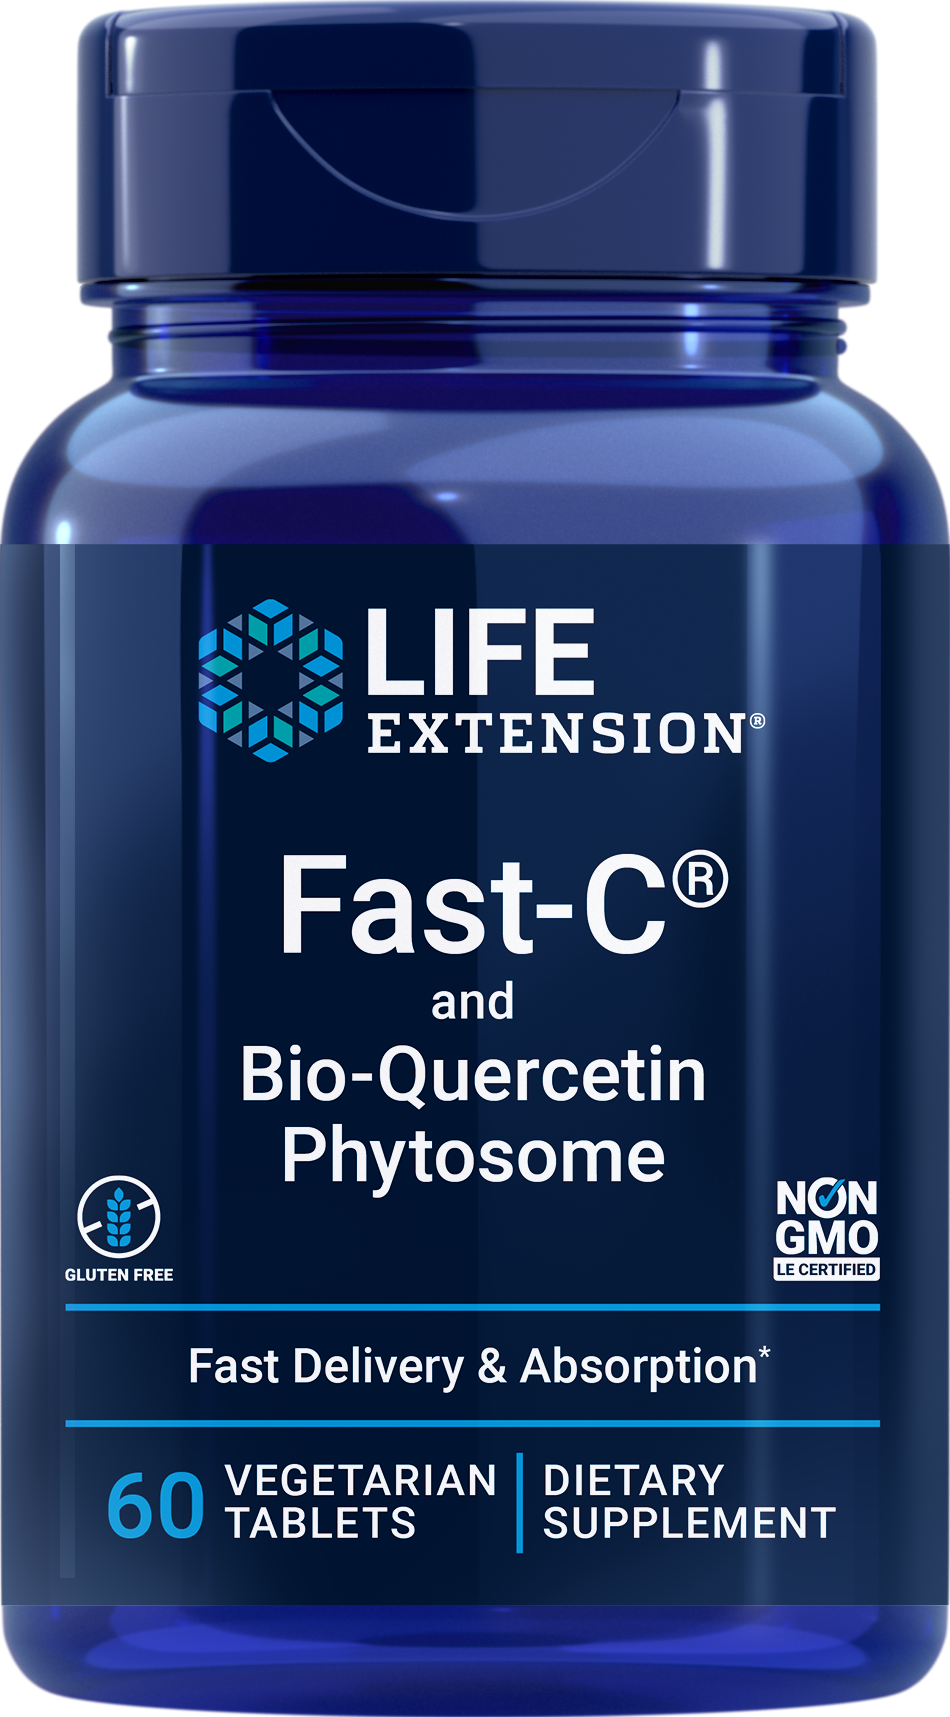 Fast-C ® and Bio-Quercetin Phytosome